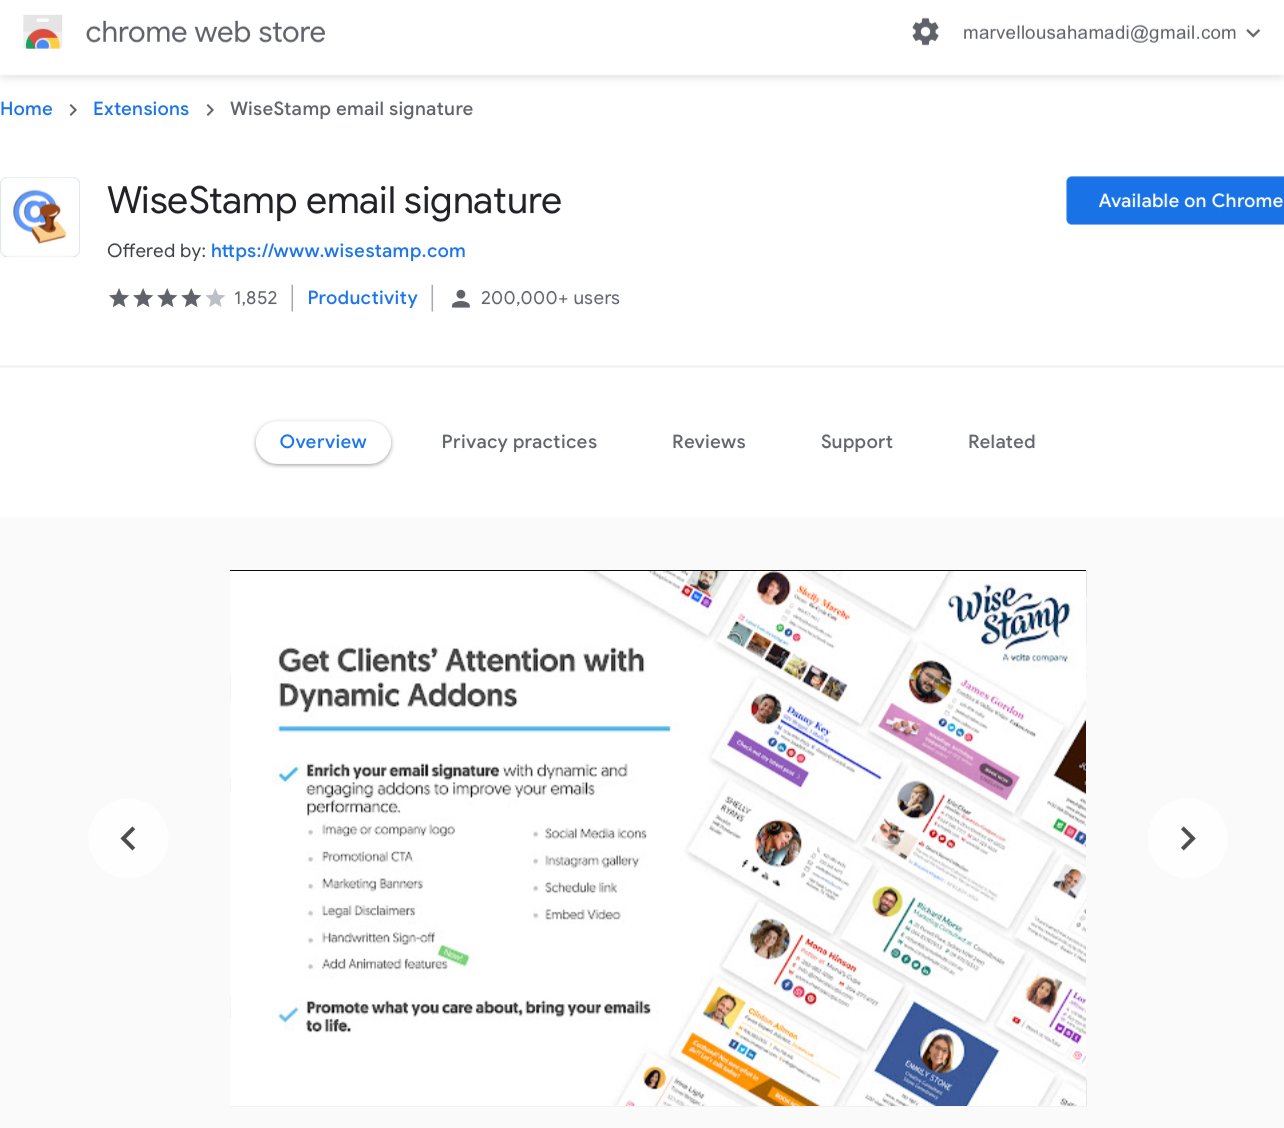 Screenshot of the WiseStamp email signature extension available in the Google Chrome web store